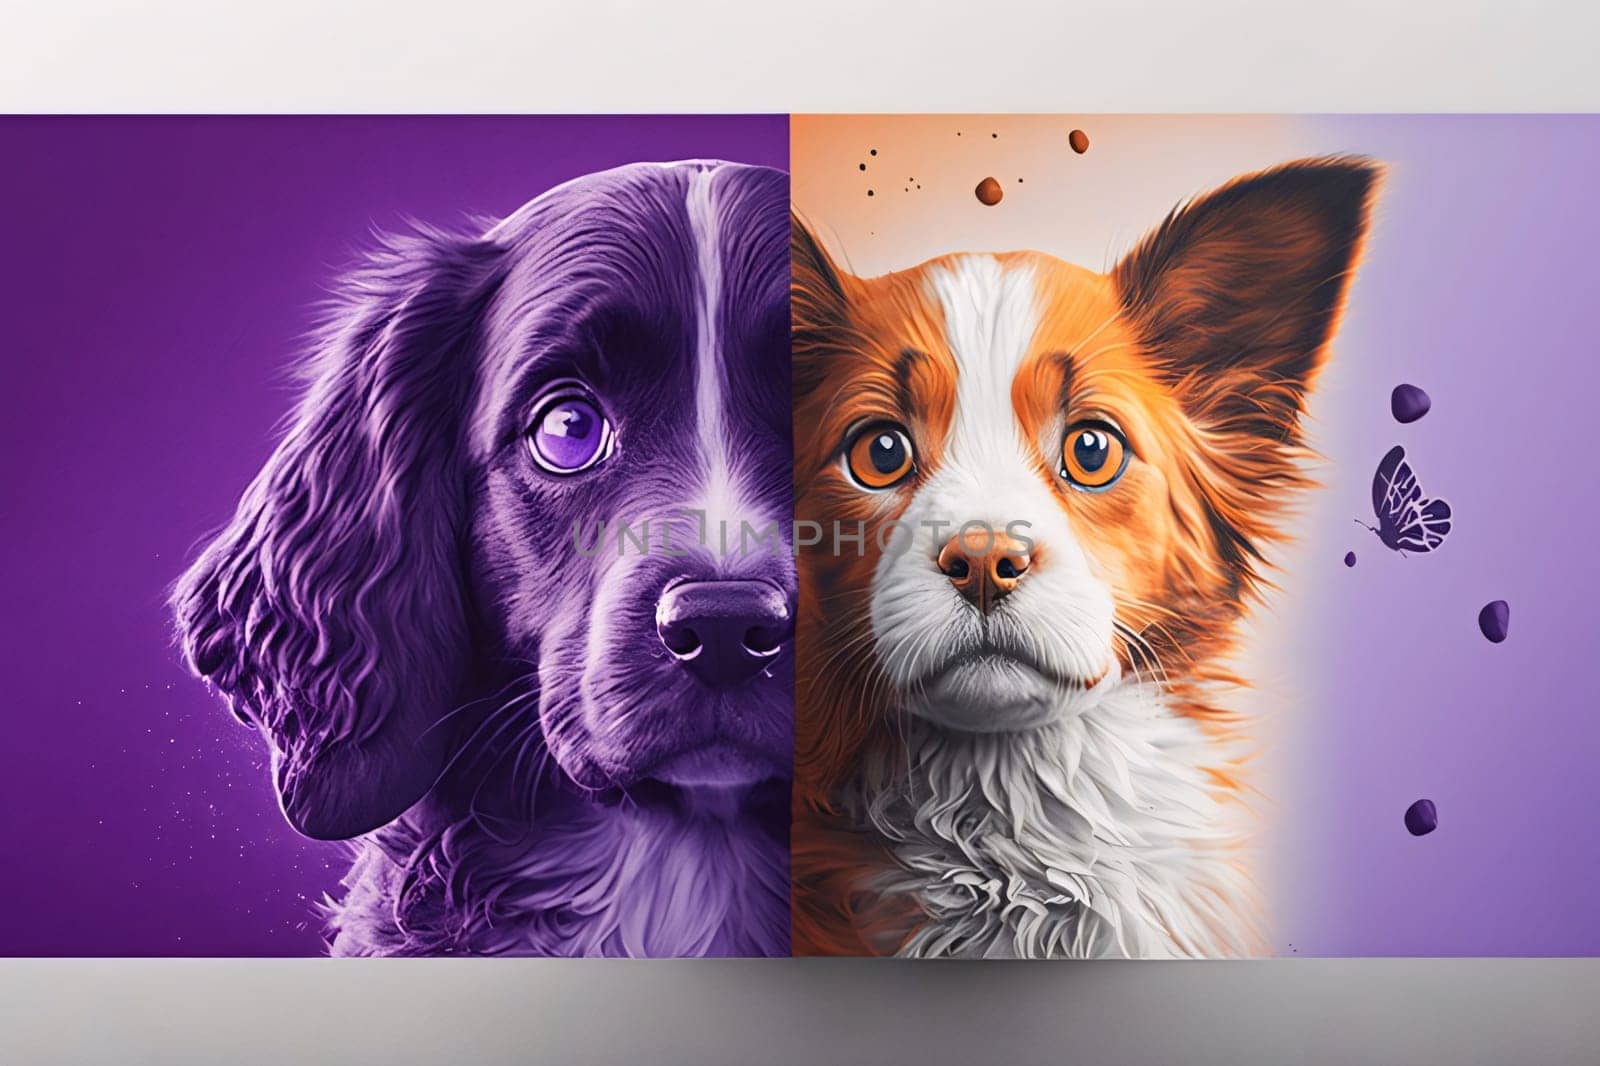 Banner: Collage of portraits of a dog and a butterfly on a purple background